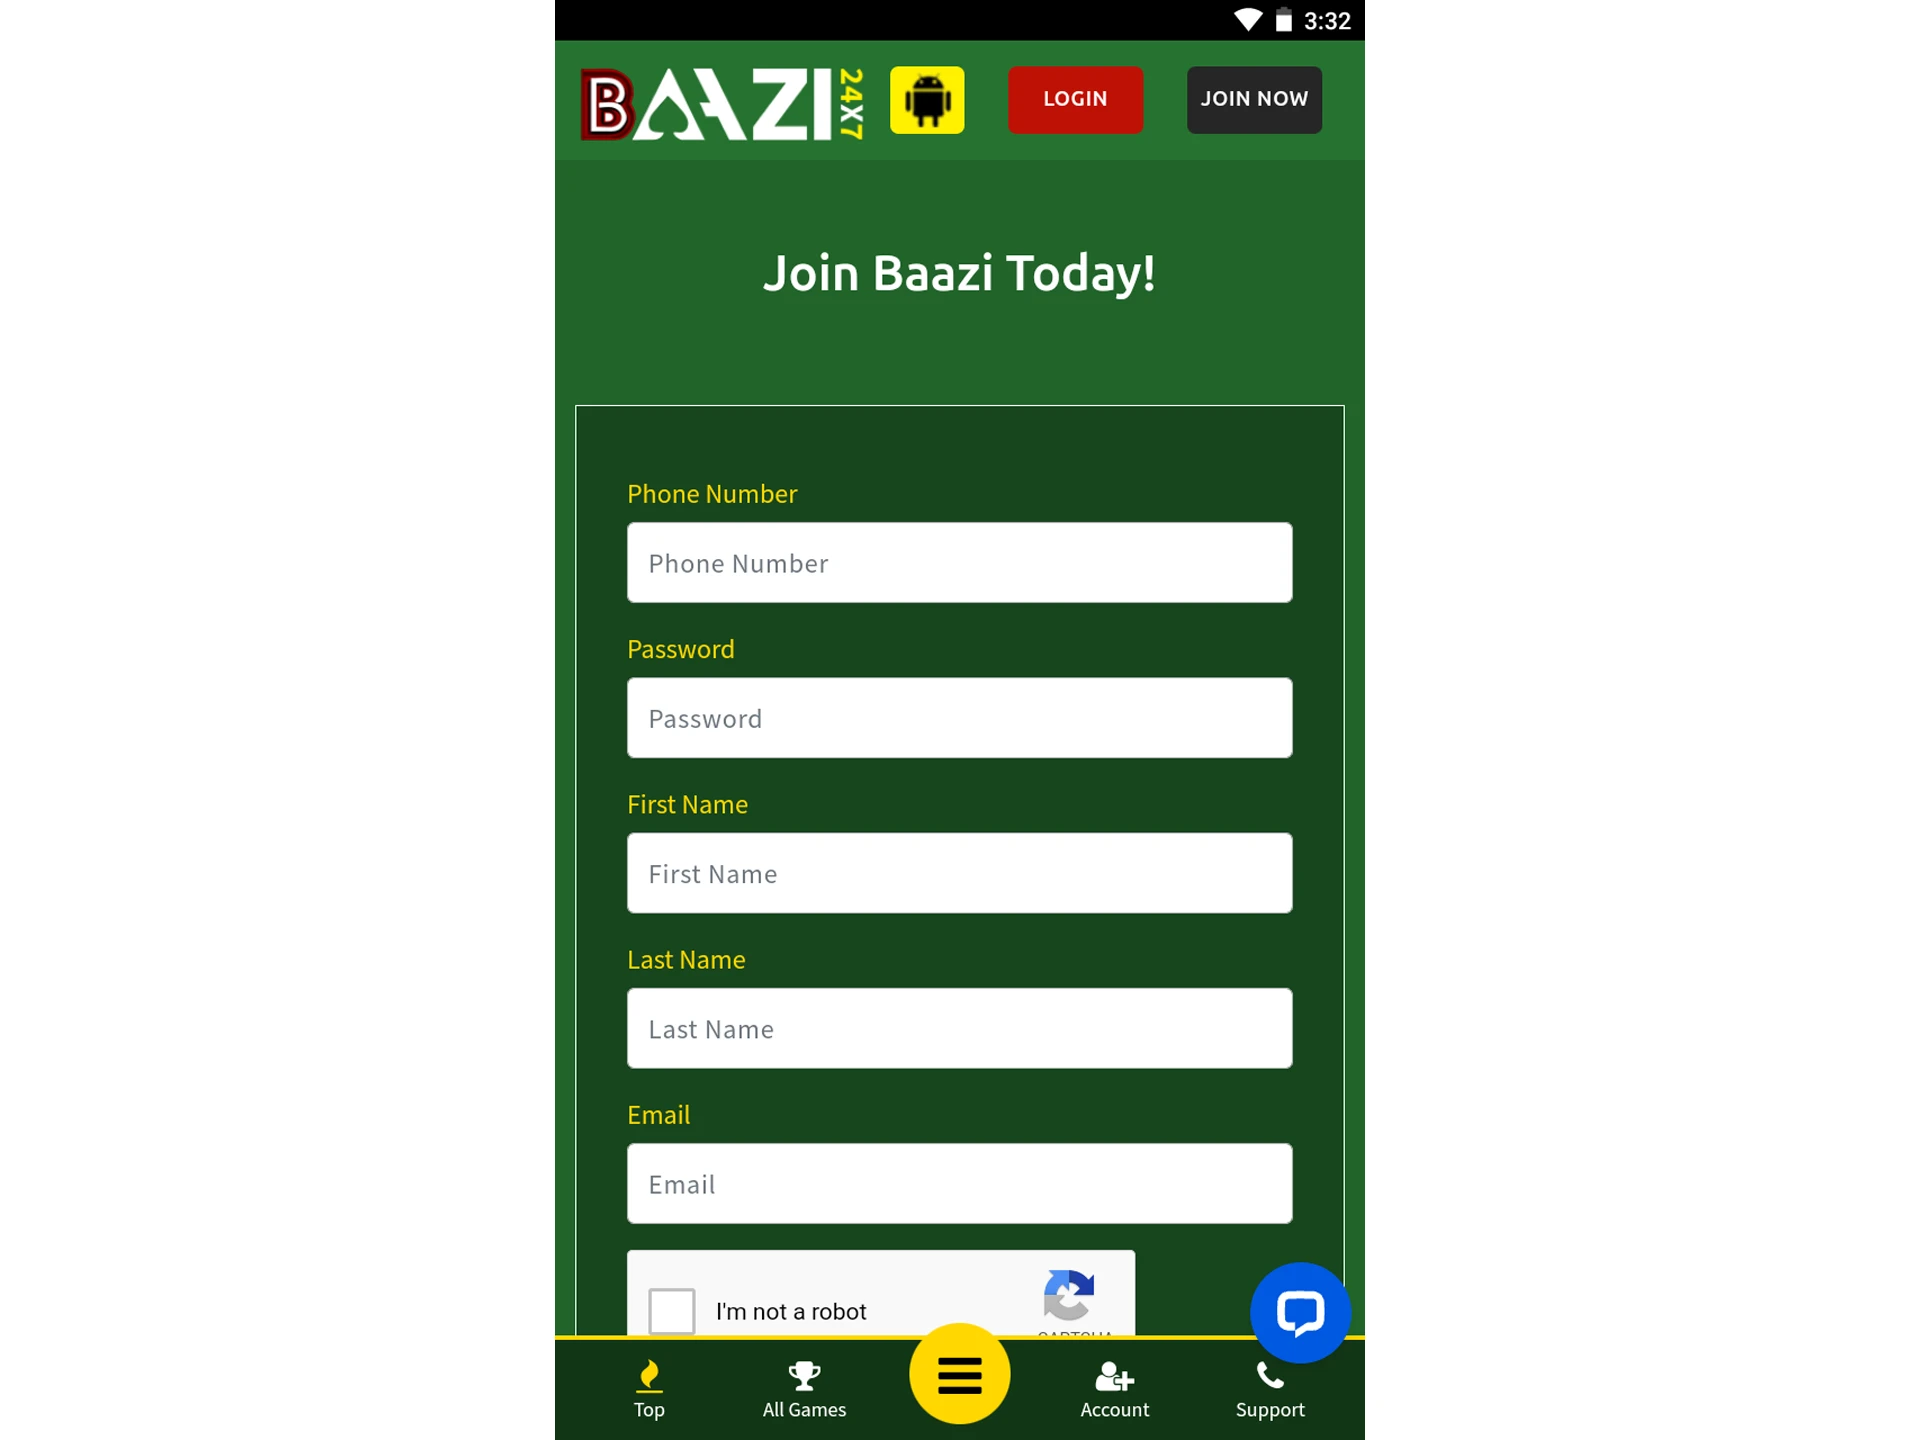 Complete the registration process on the Baazi247 app.